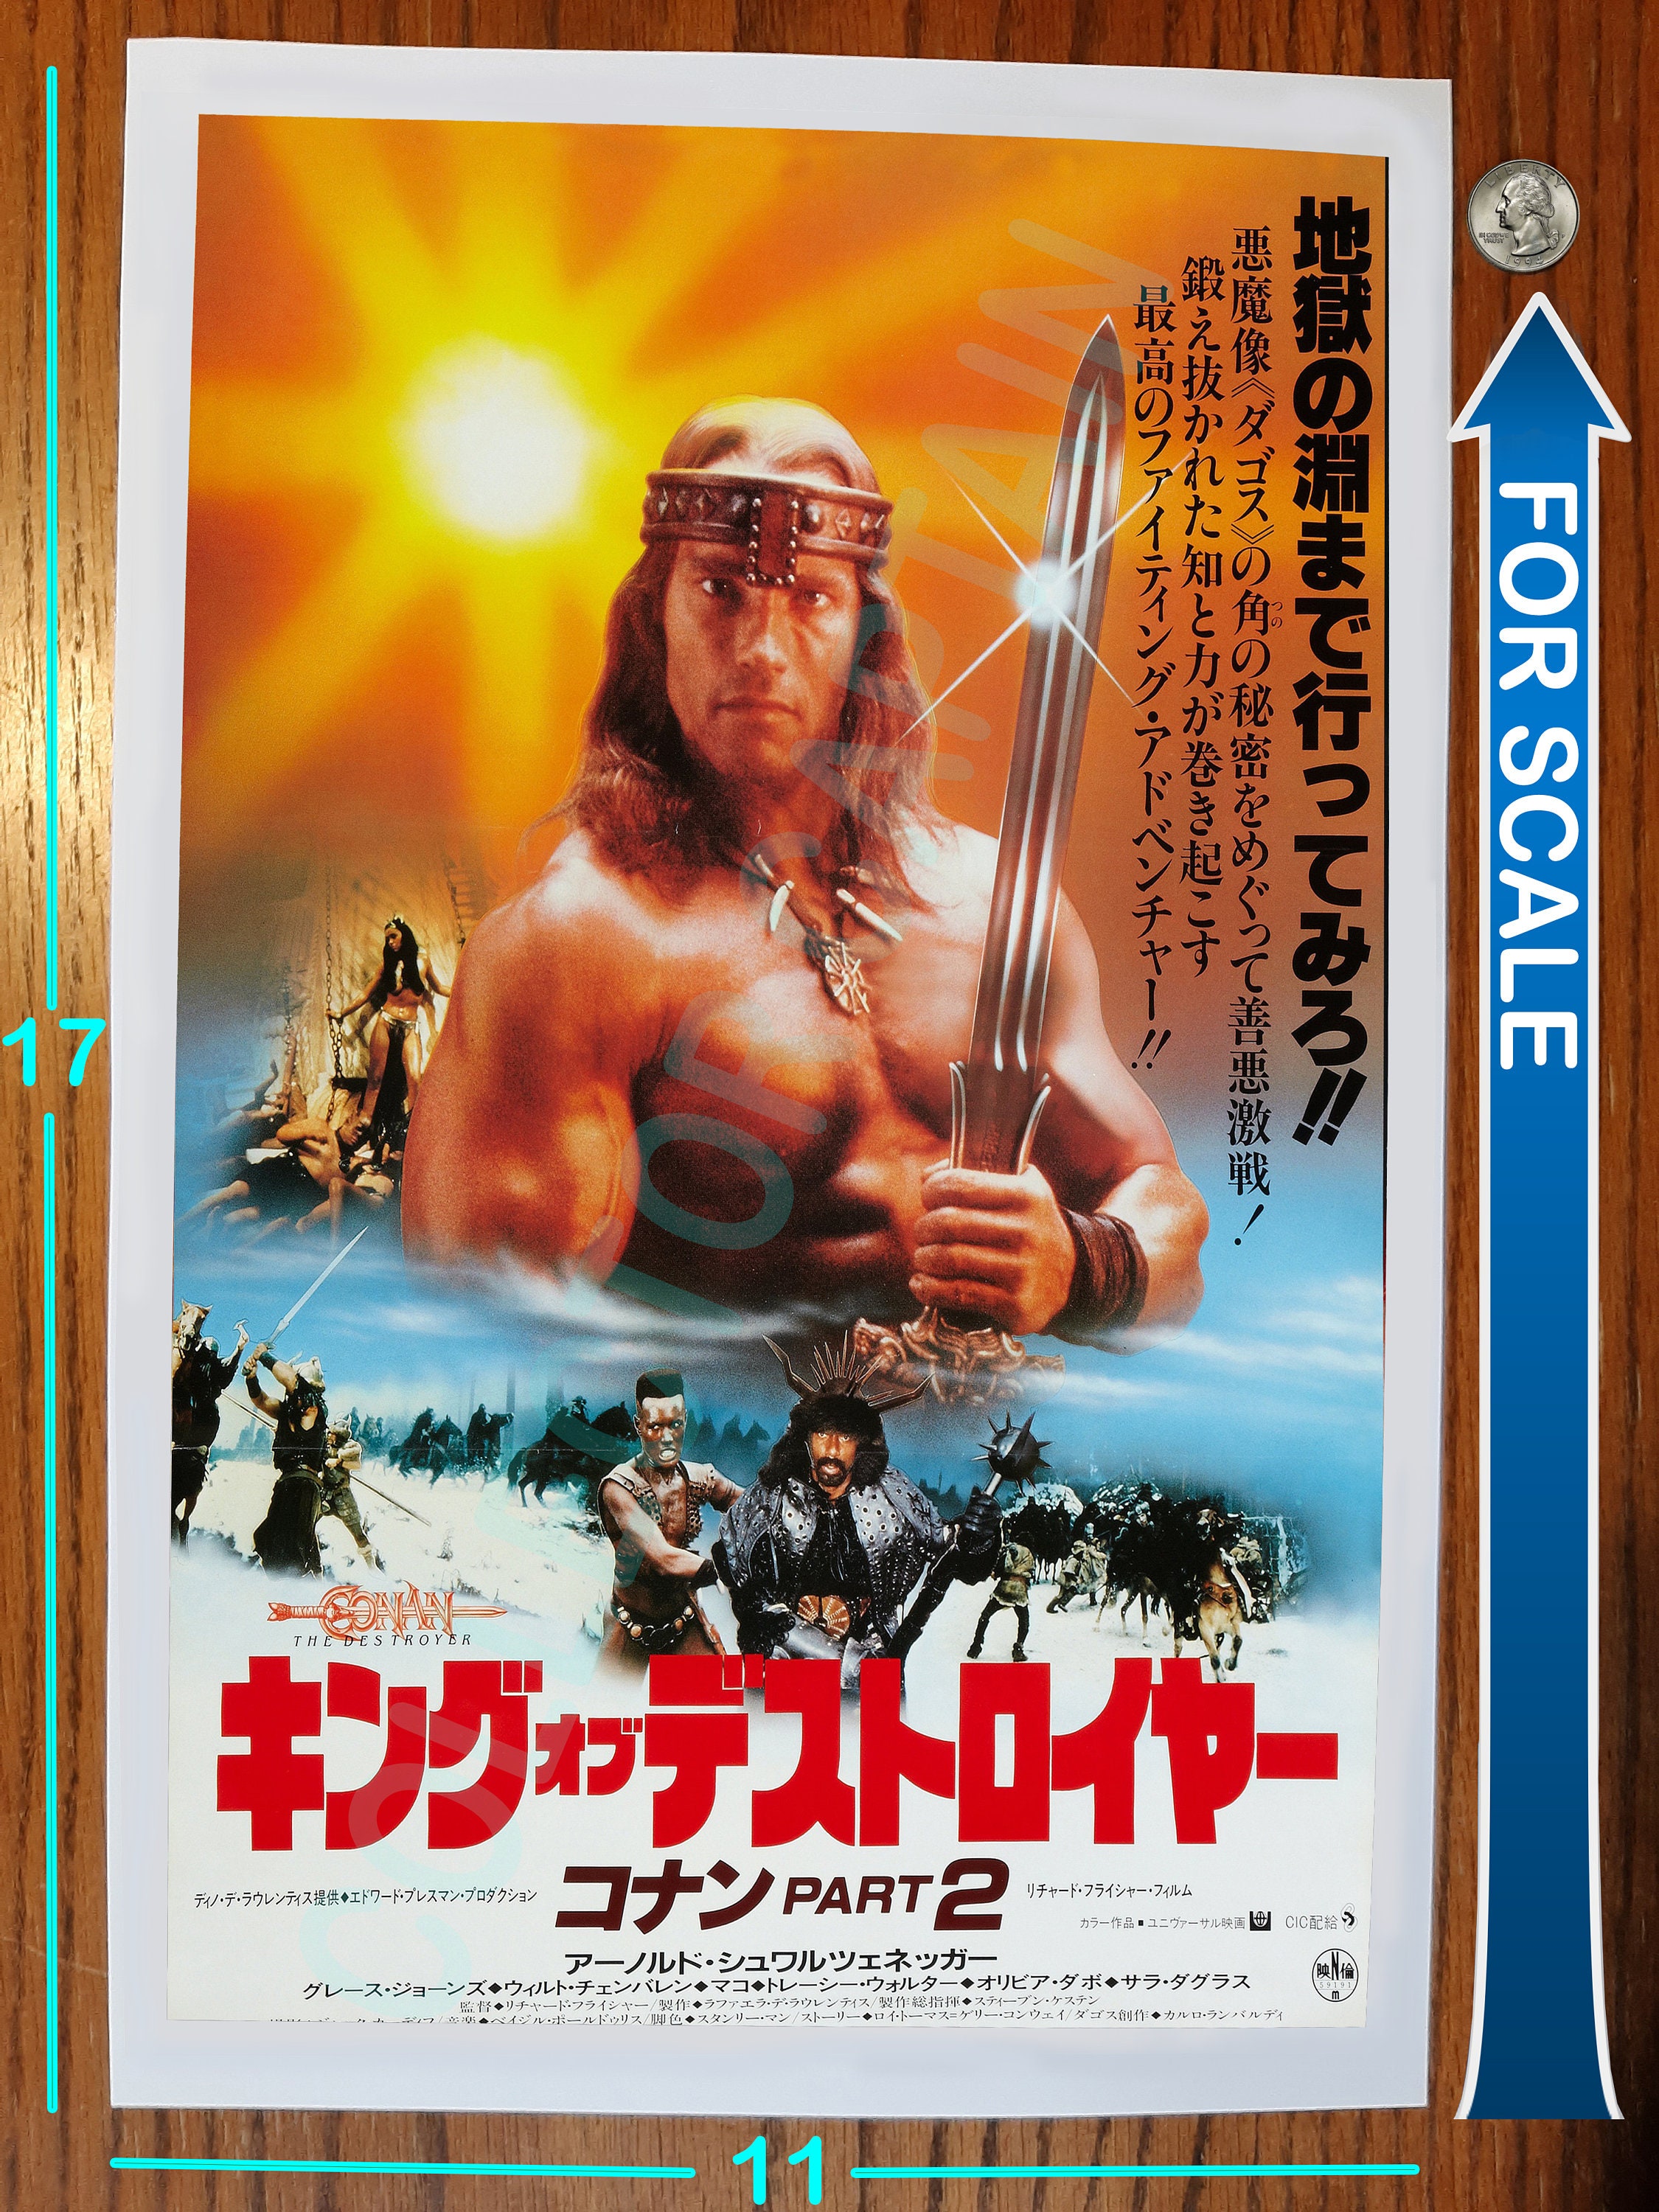 Conan The Destroyer 10 5x15 Japanese Movie Poster Reprint Etsy